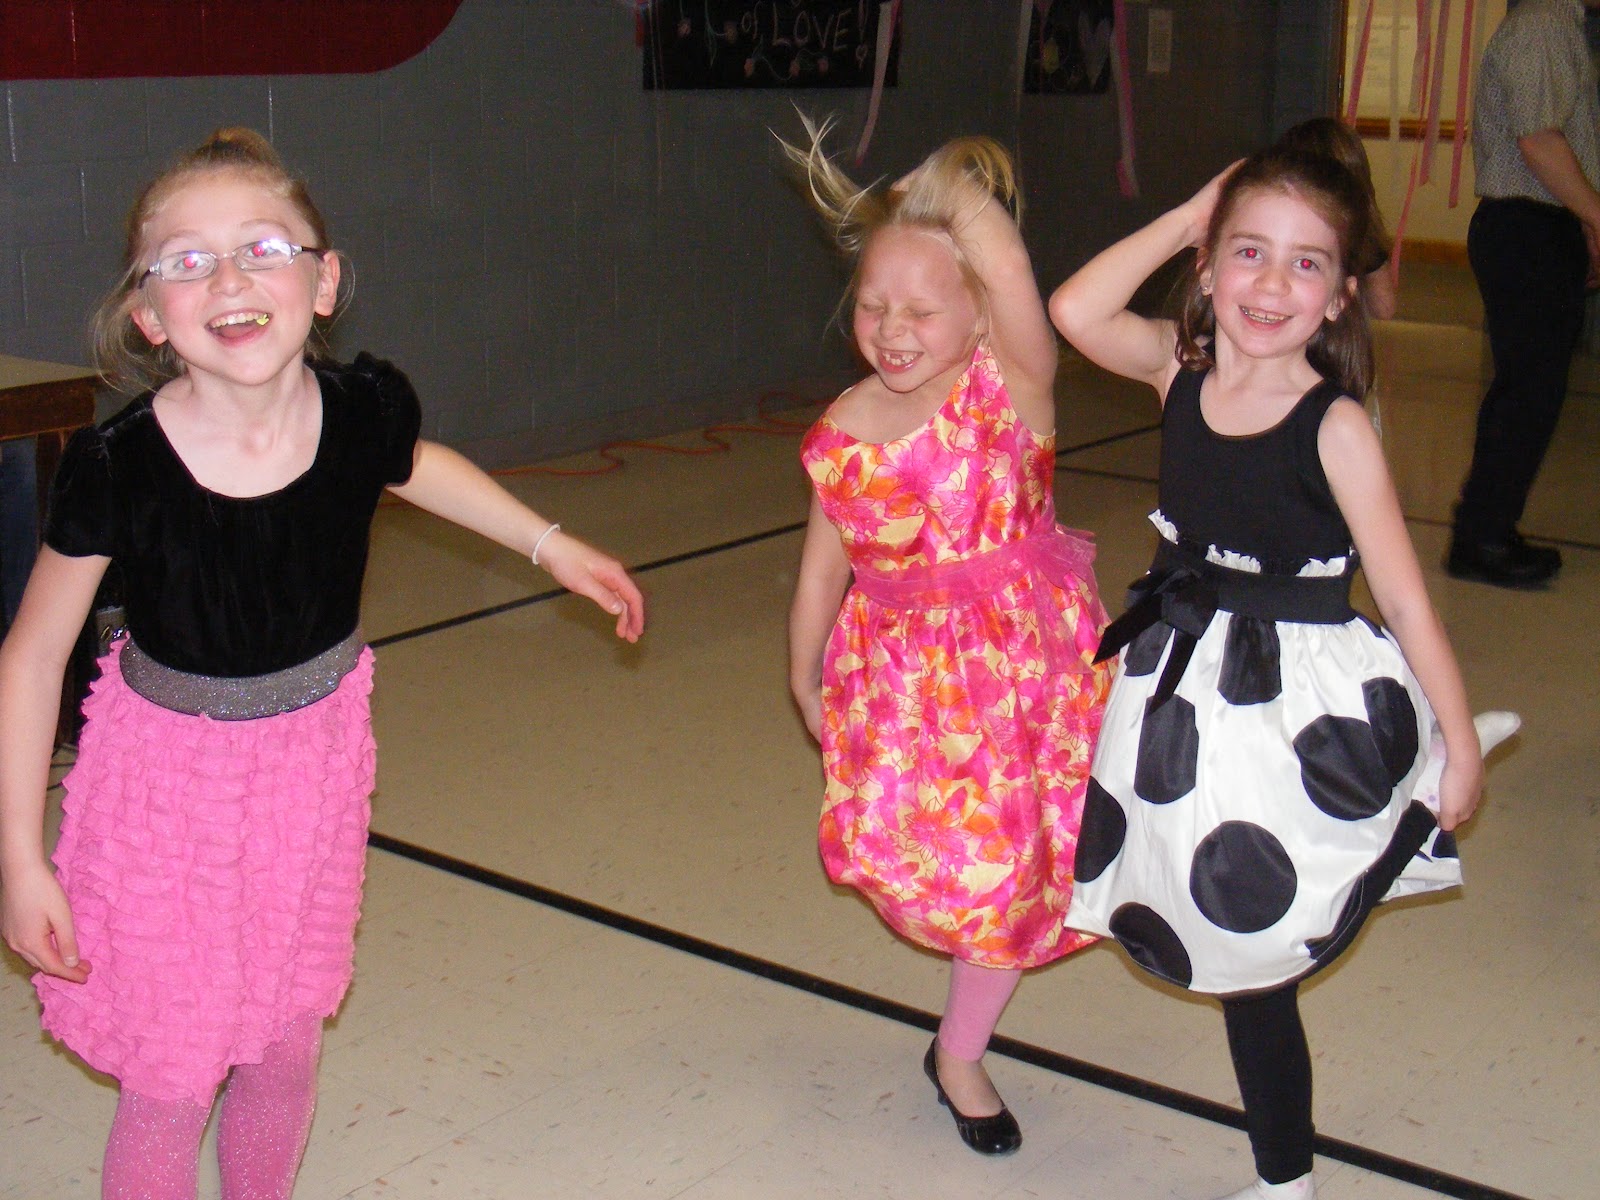 Friday Enrichment Daddy Daughter Dance What A Great Enrichment